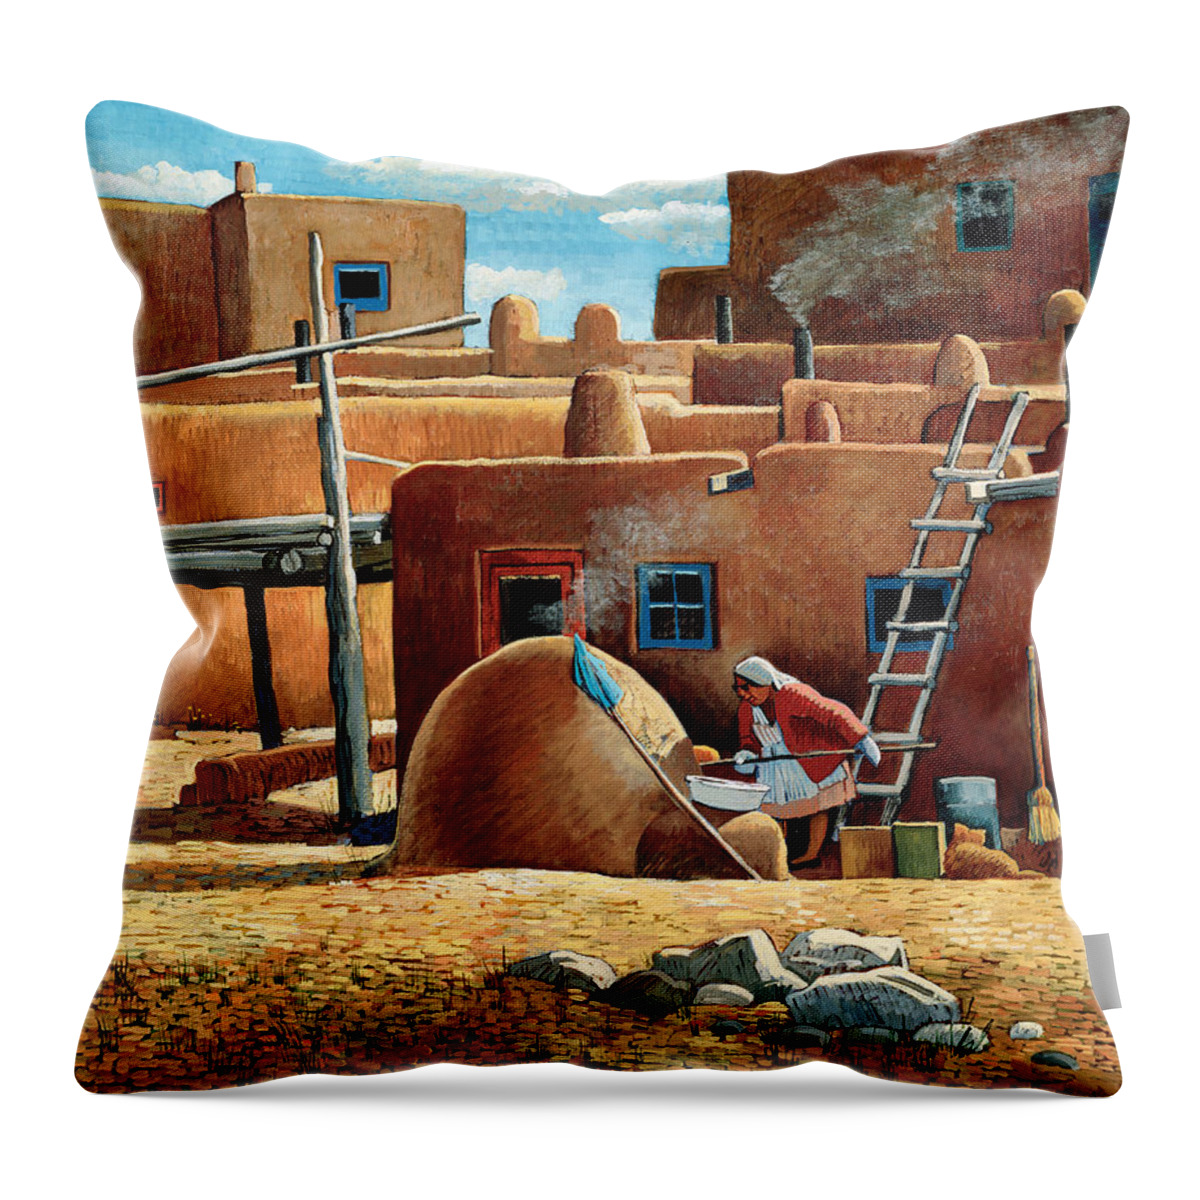 New Mexico Throw Pillow featuring the painting Our Daily Bread by Donna Clair